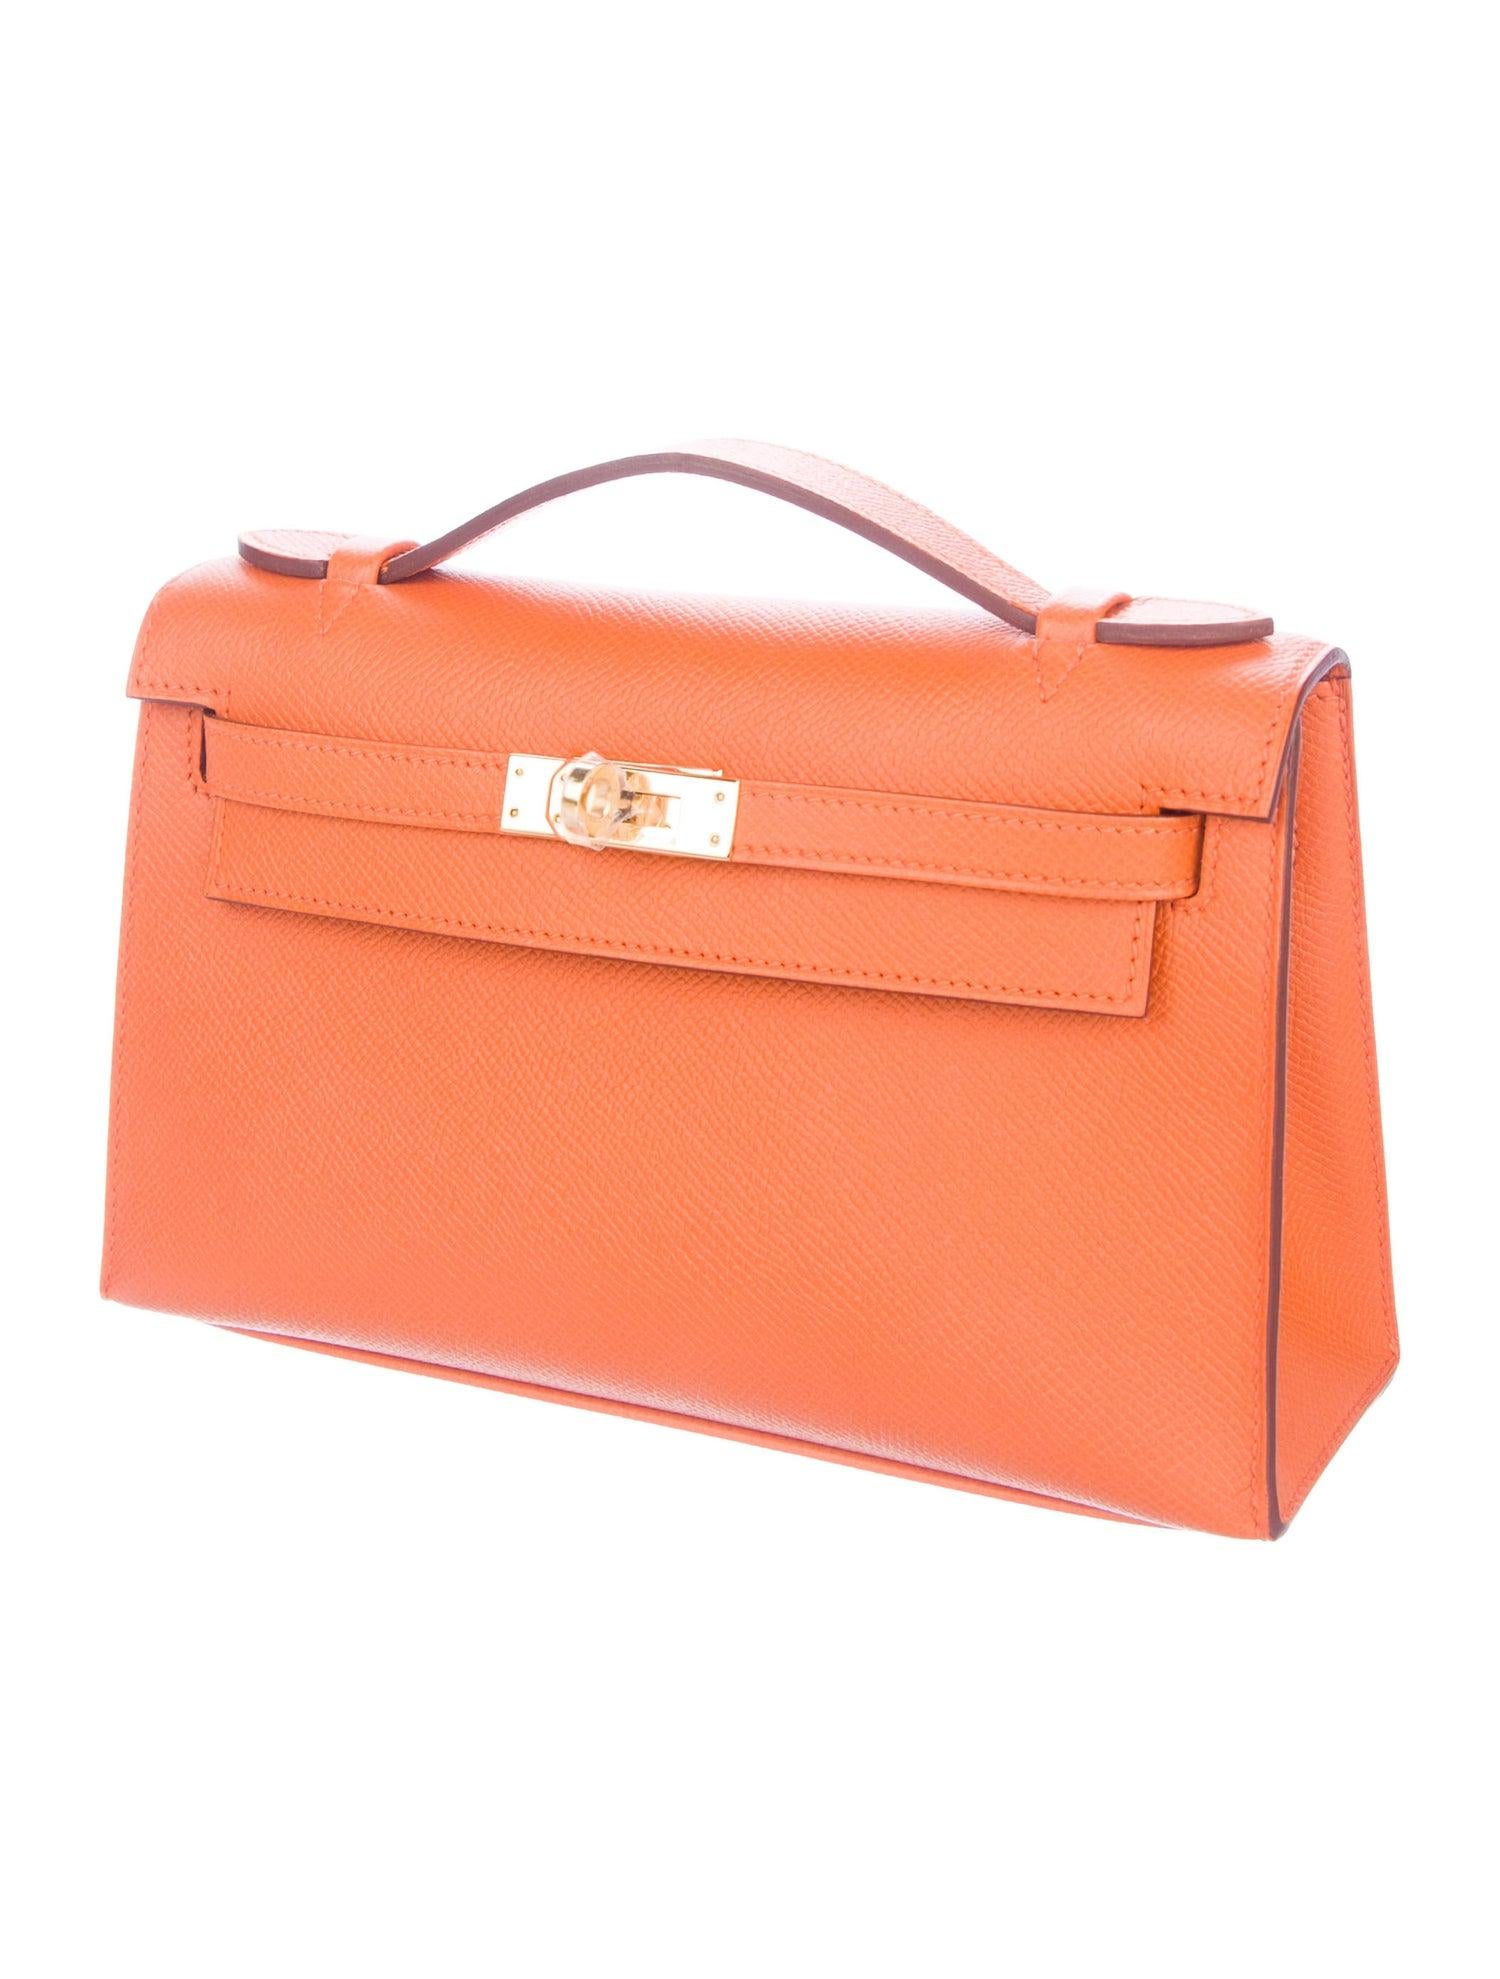 Women's Hermes NEW Orange Leather Gold Top Handle Satchel Small Tote Bag in Box